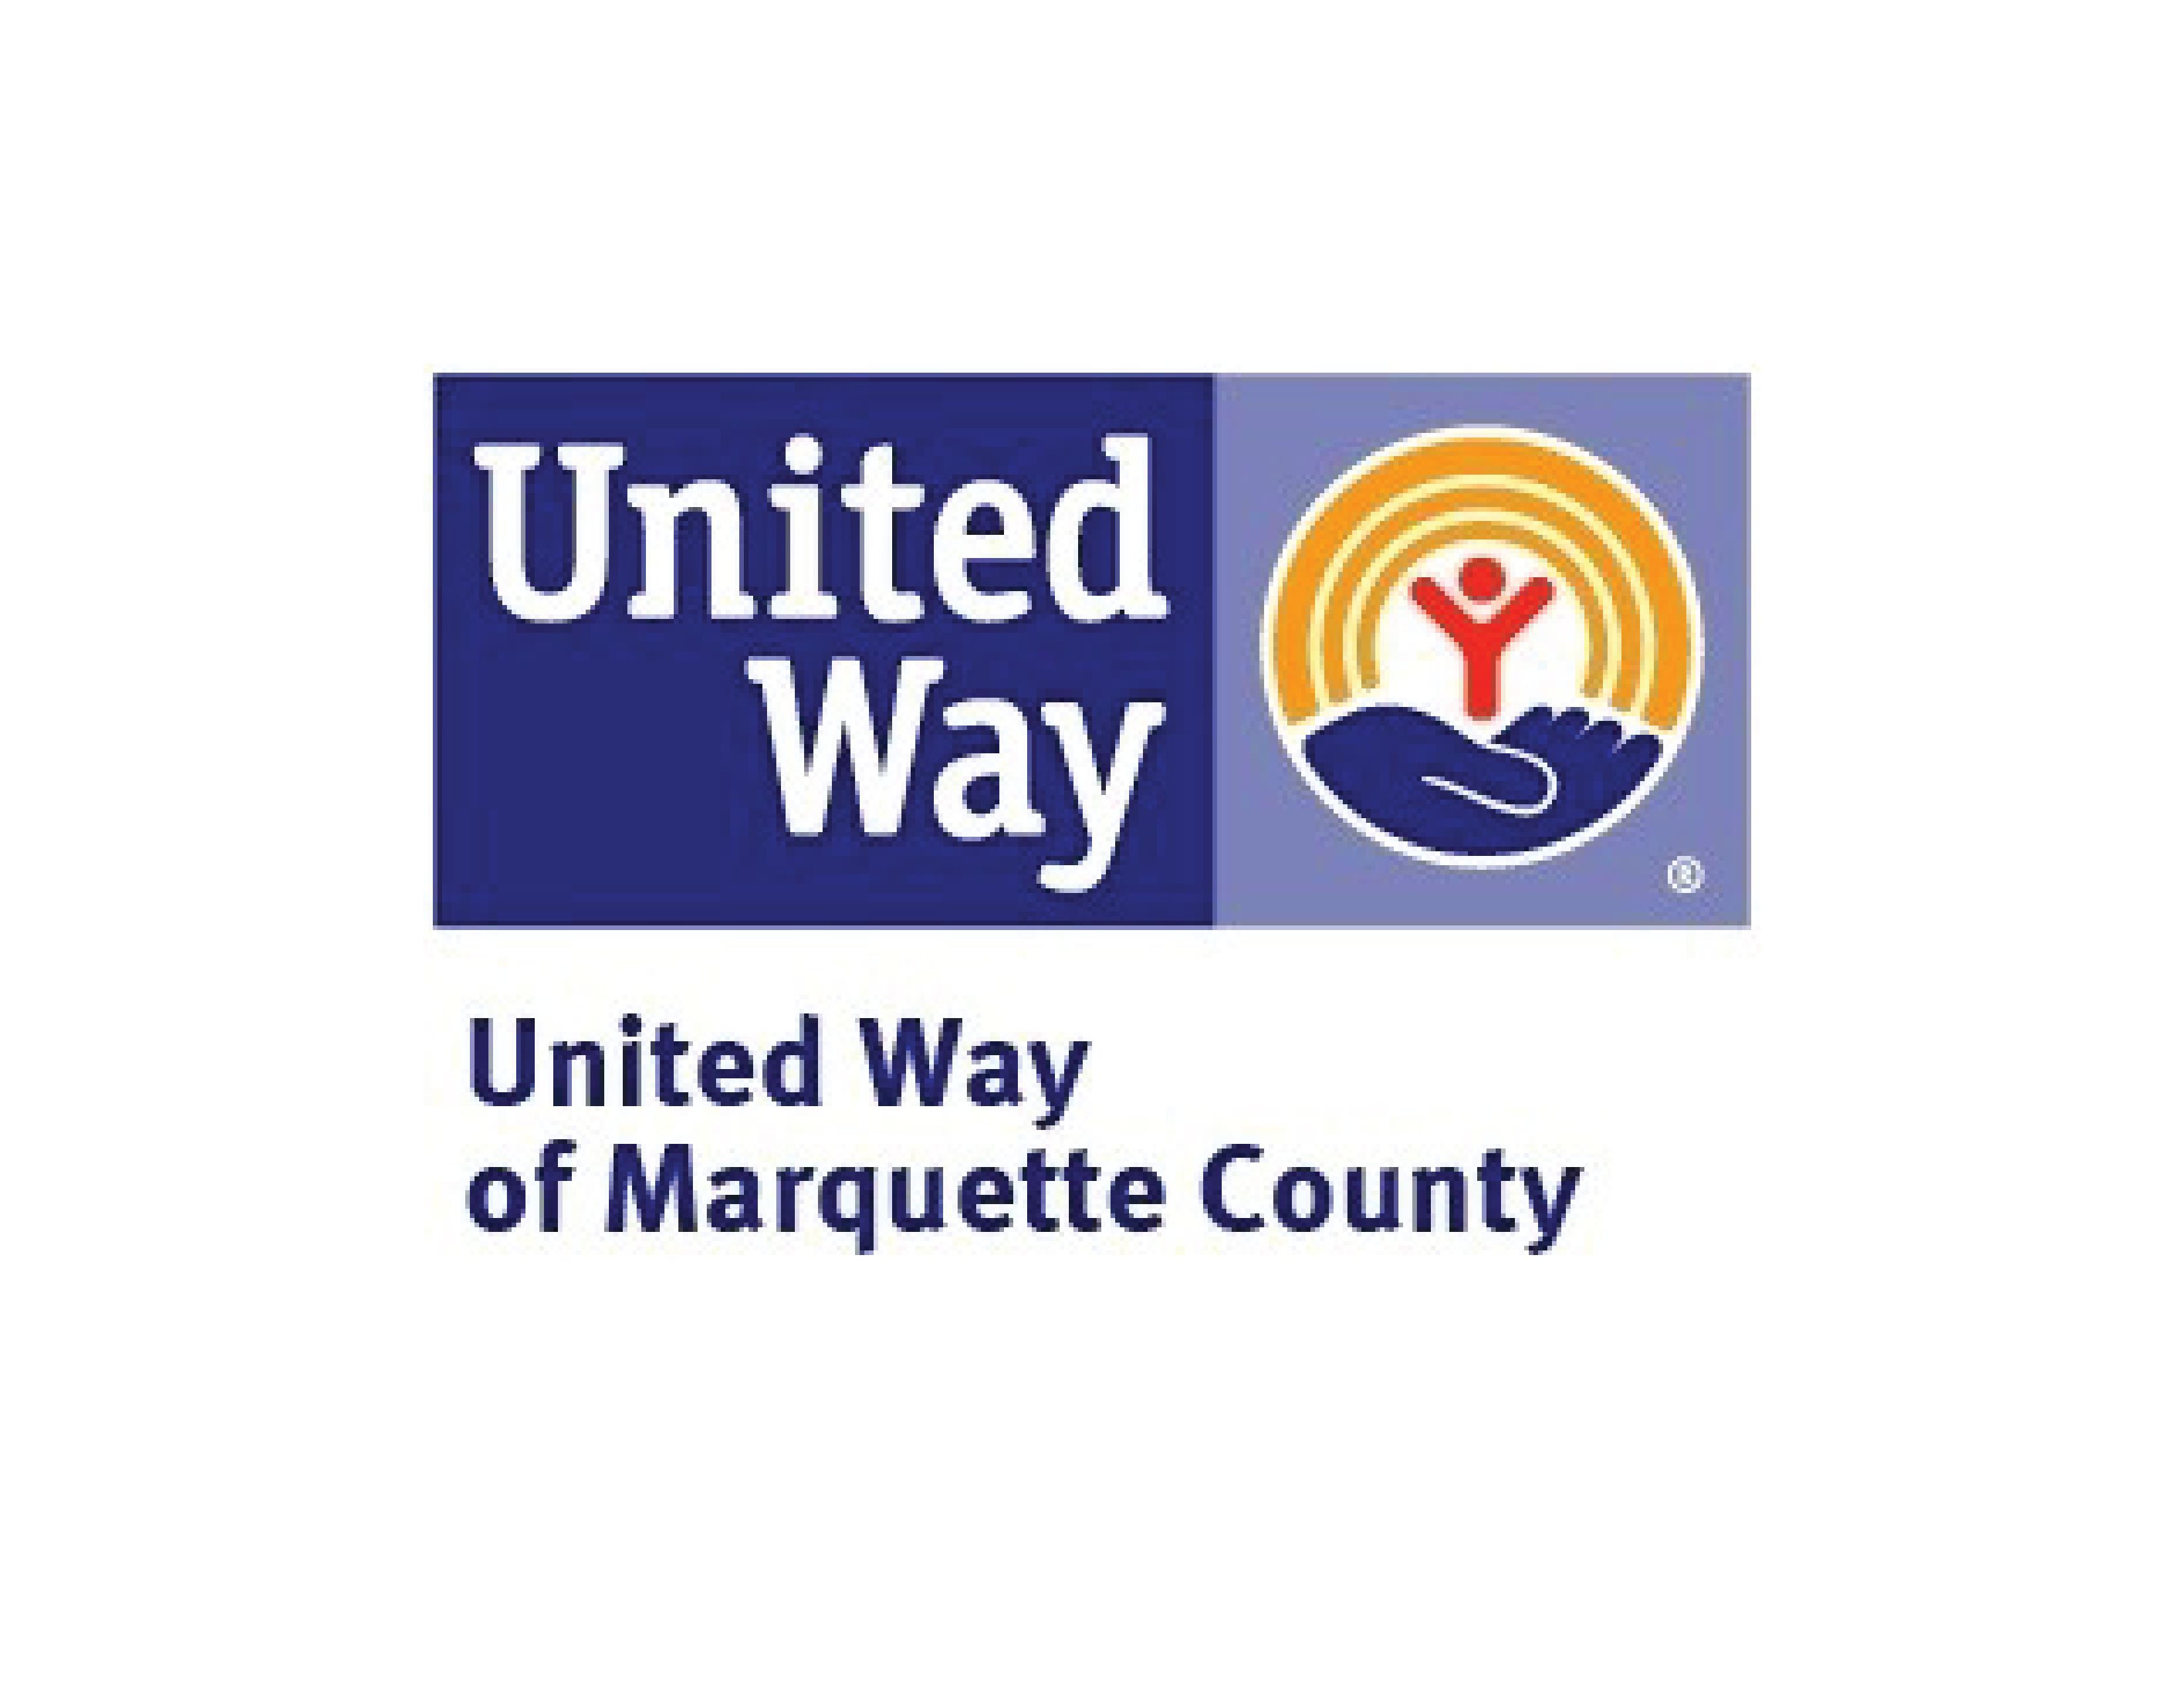 United Way of Marquette County